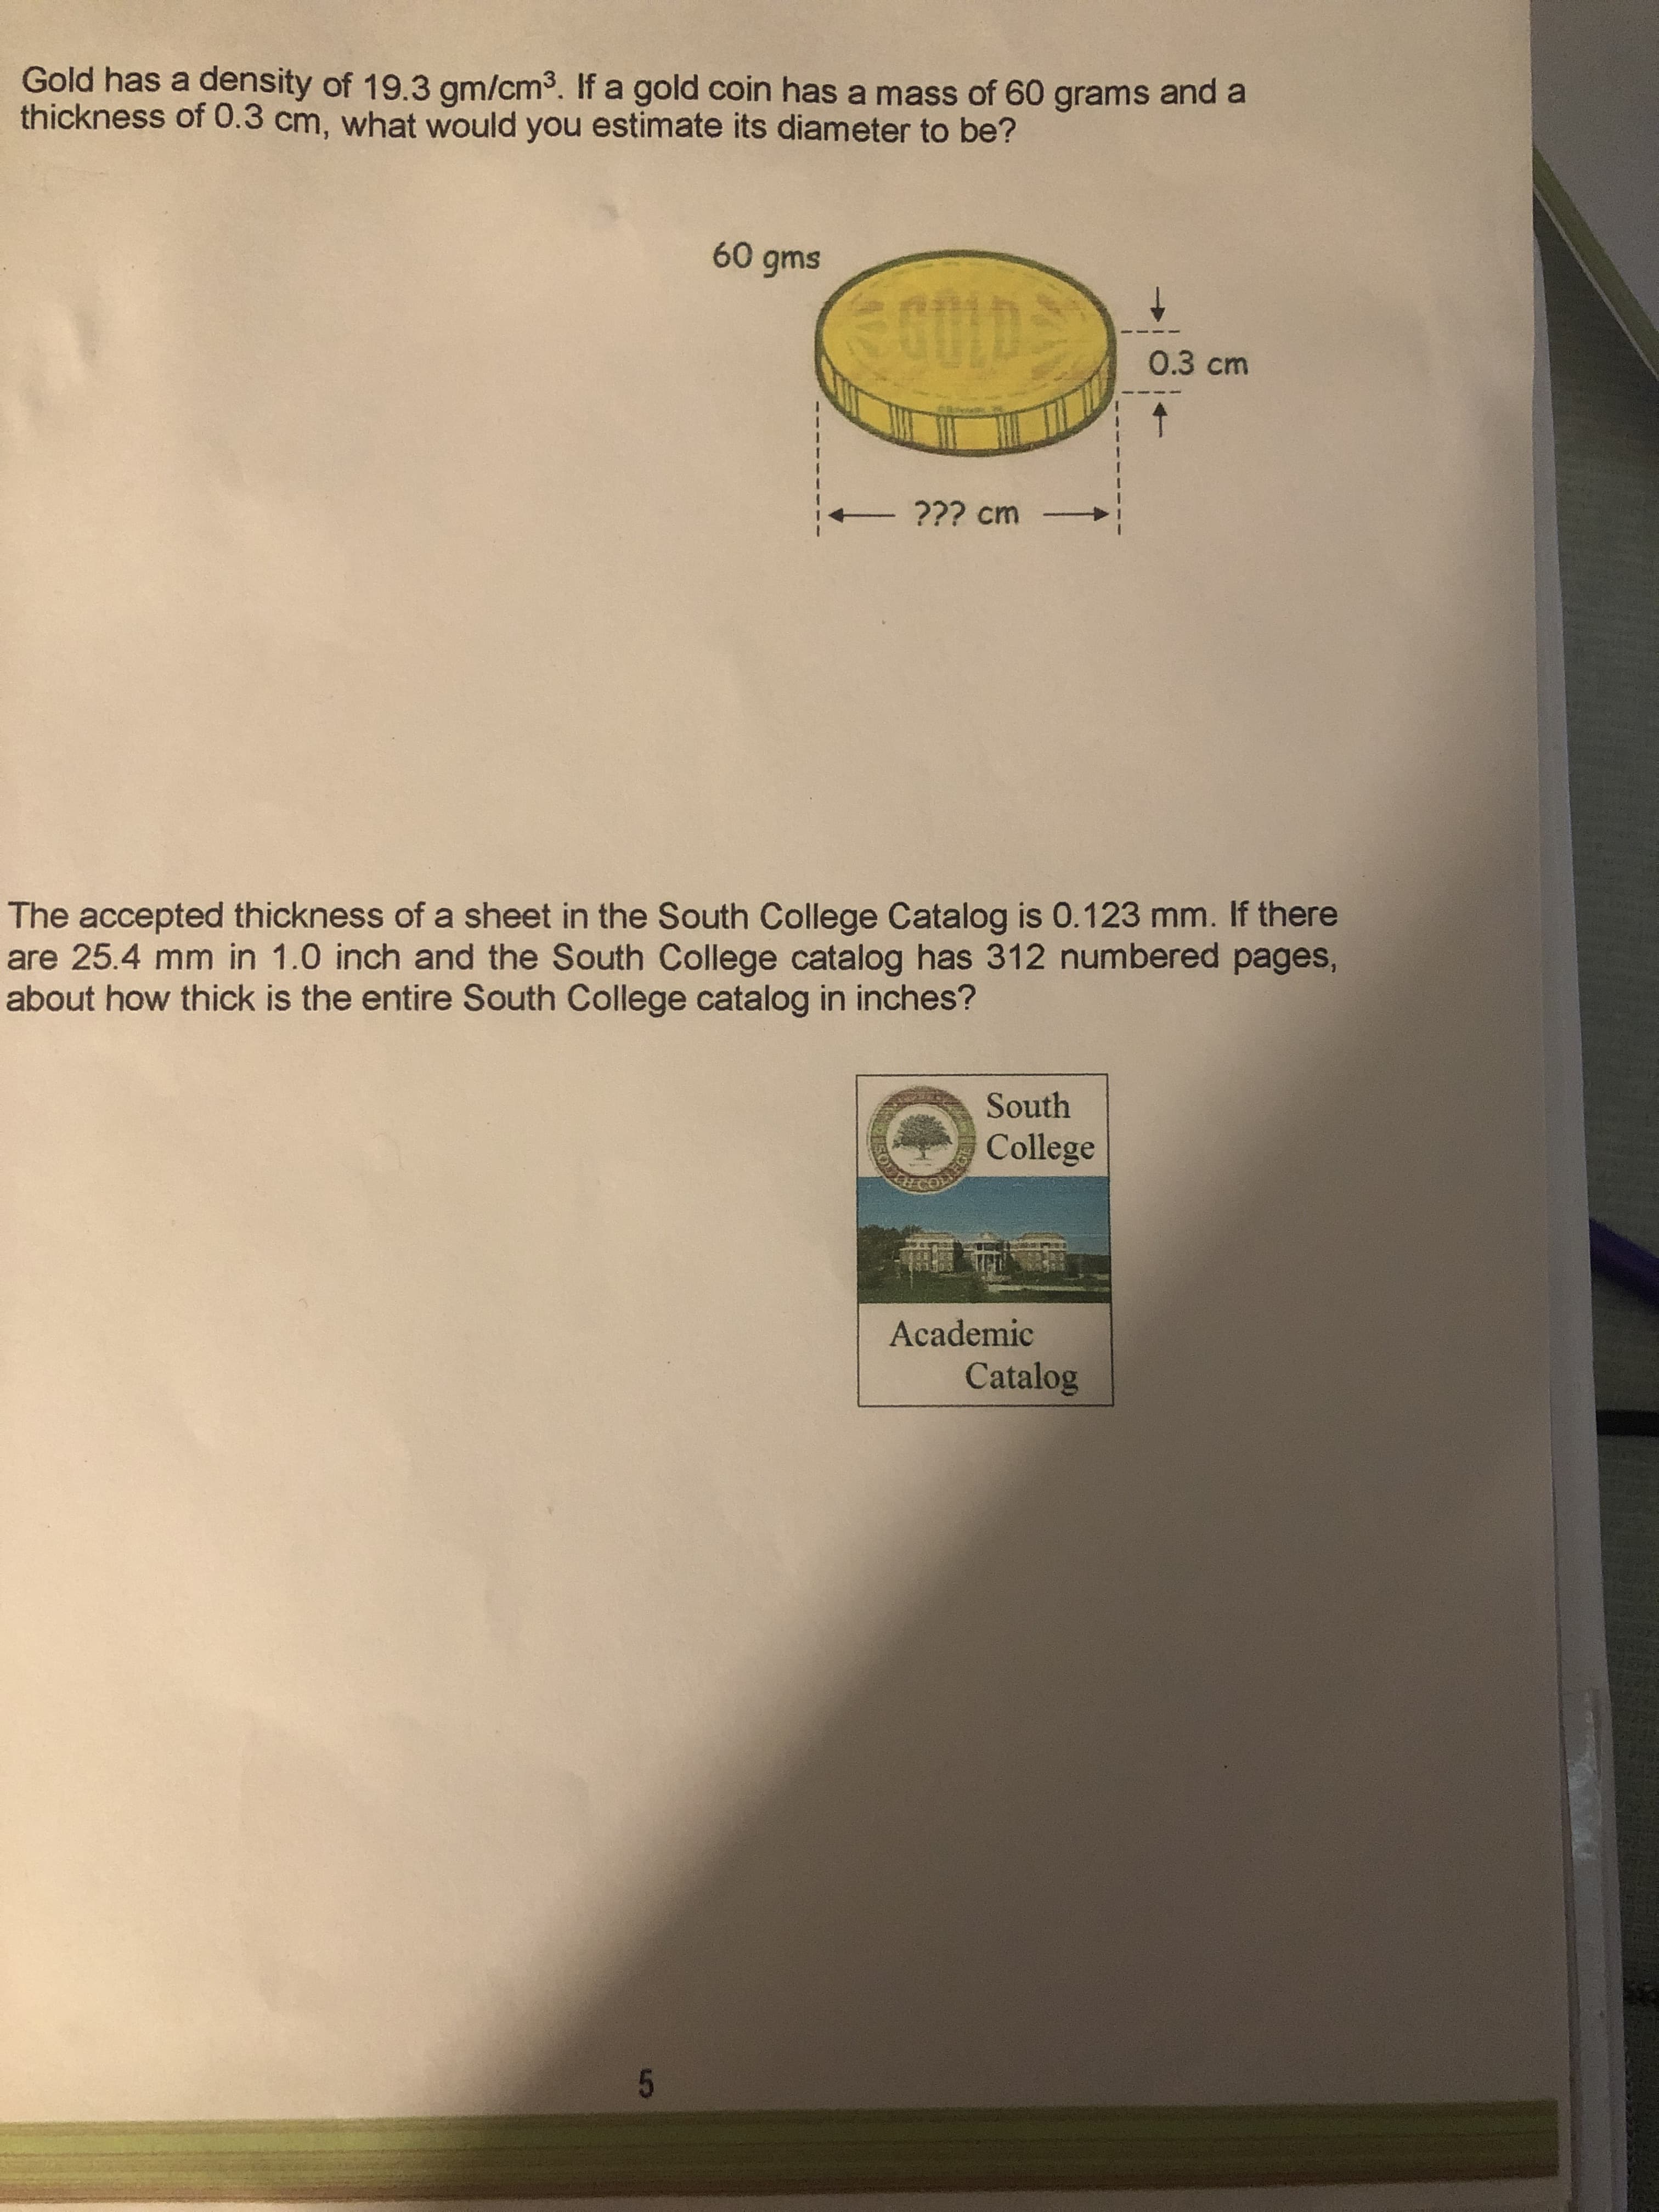 Gold has a density of 19.3 gm/cm3. If a gold coin has a mass of 60 grams and a
thickness of 0.3 cm, what would you estimate its diameter to be?
0.3cm
??? cm
The accepted thickness of a sheet in the South College Catalog is 0.123 mm. If there
are 25.4 mm in 1.0 inch and the South College catalog has 312 numbered pages,
about how thick is the entire South College catalog in inches?
South
College
Academic
Catalog
